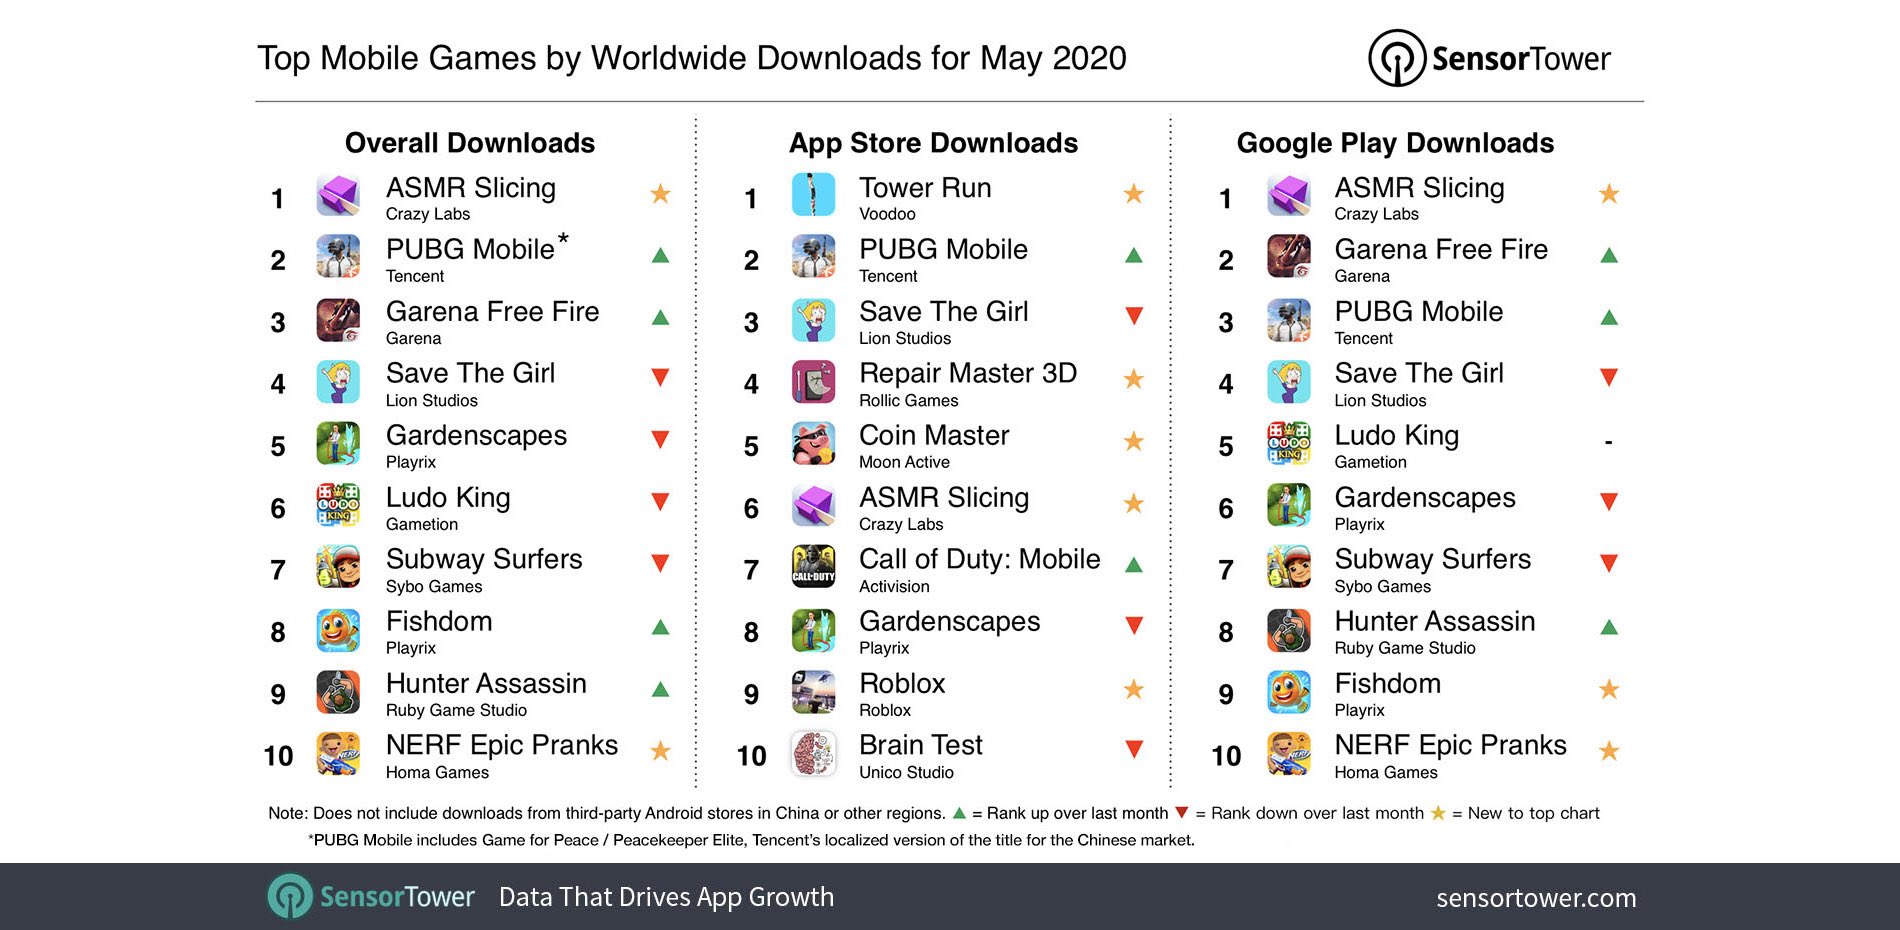 Roundhill Investments On Twitter Garena Free Fire Was The Third Most Downloaded Game Globally In May Per Sensortower Se - fire lion roblox